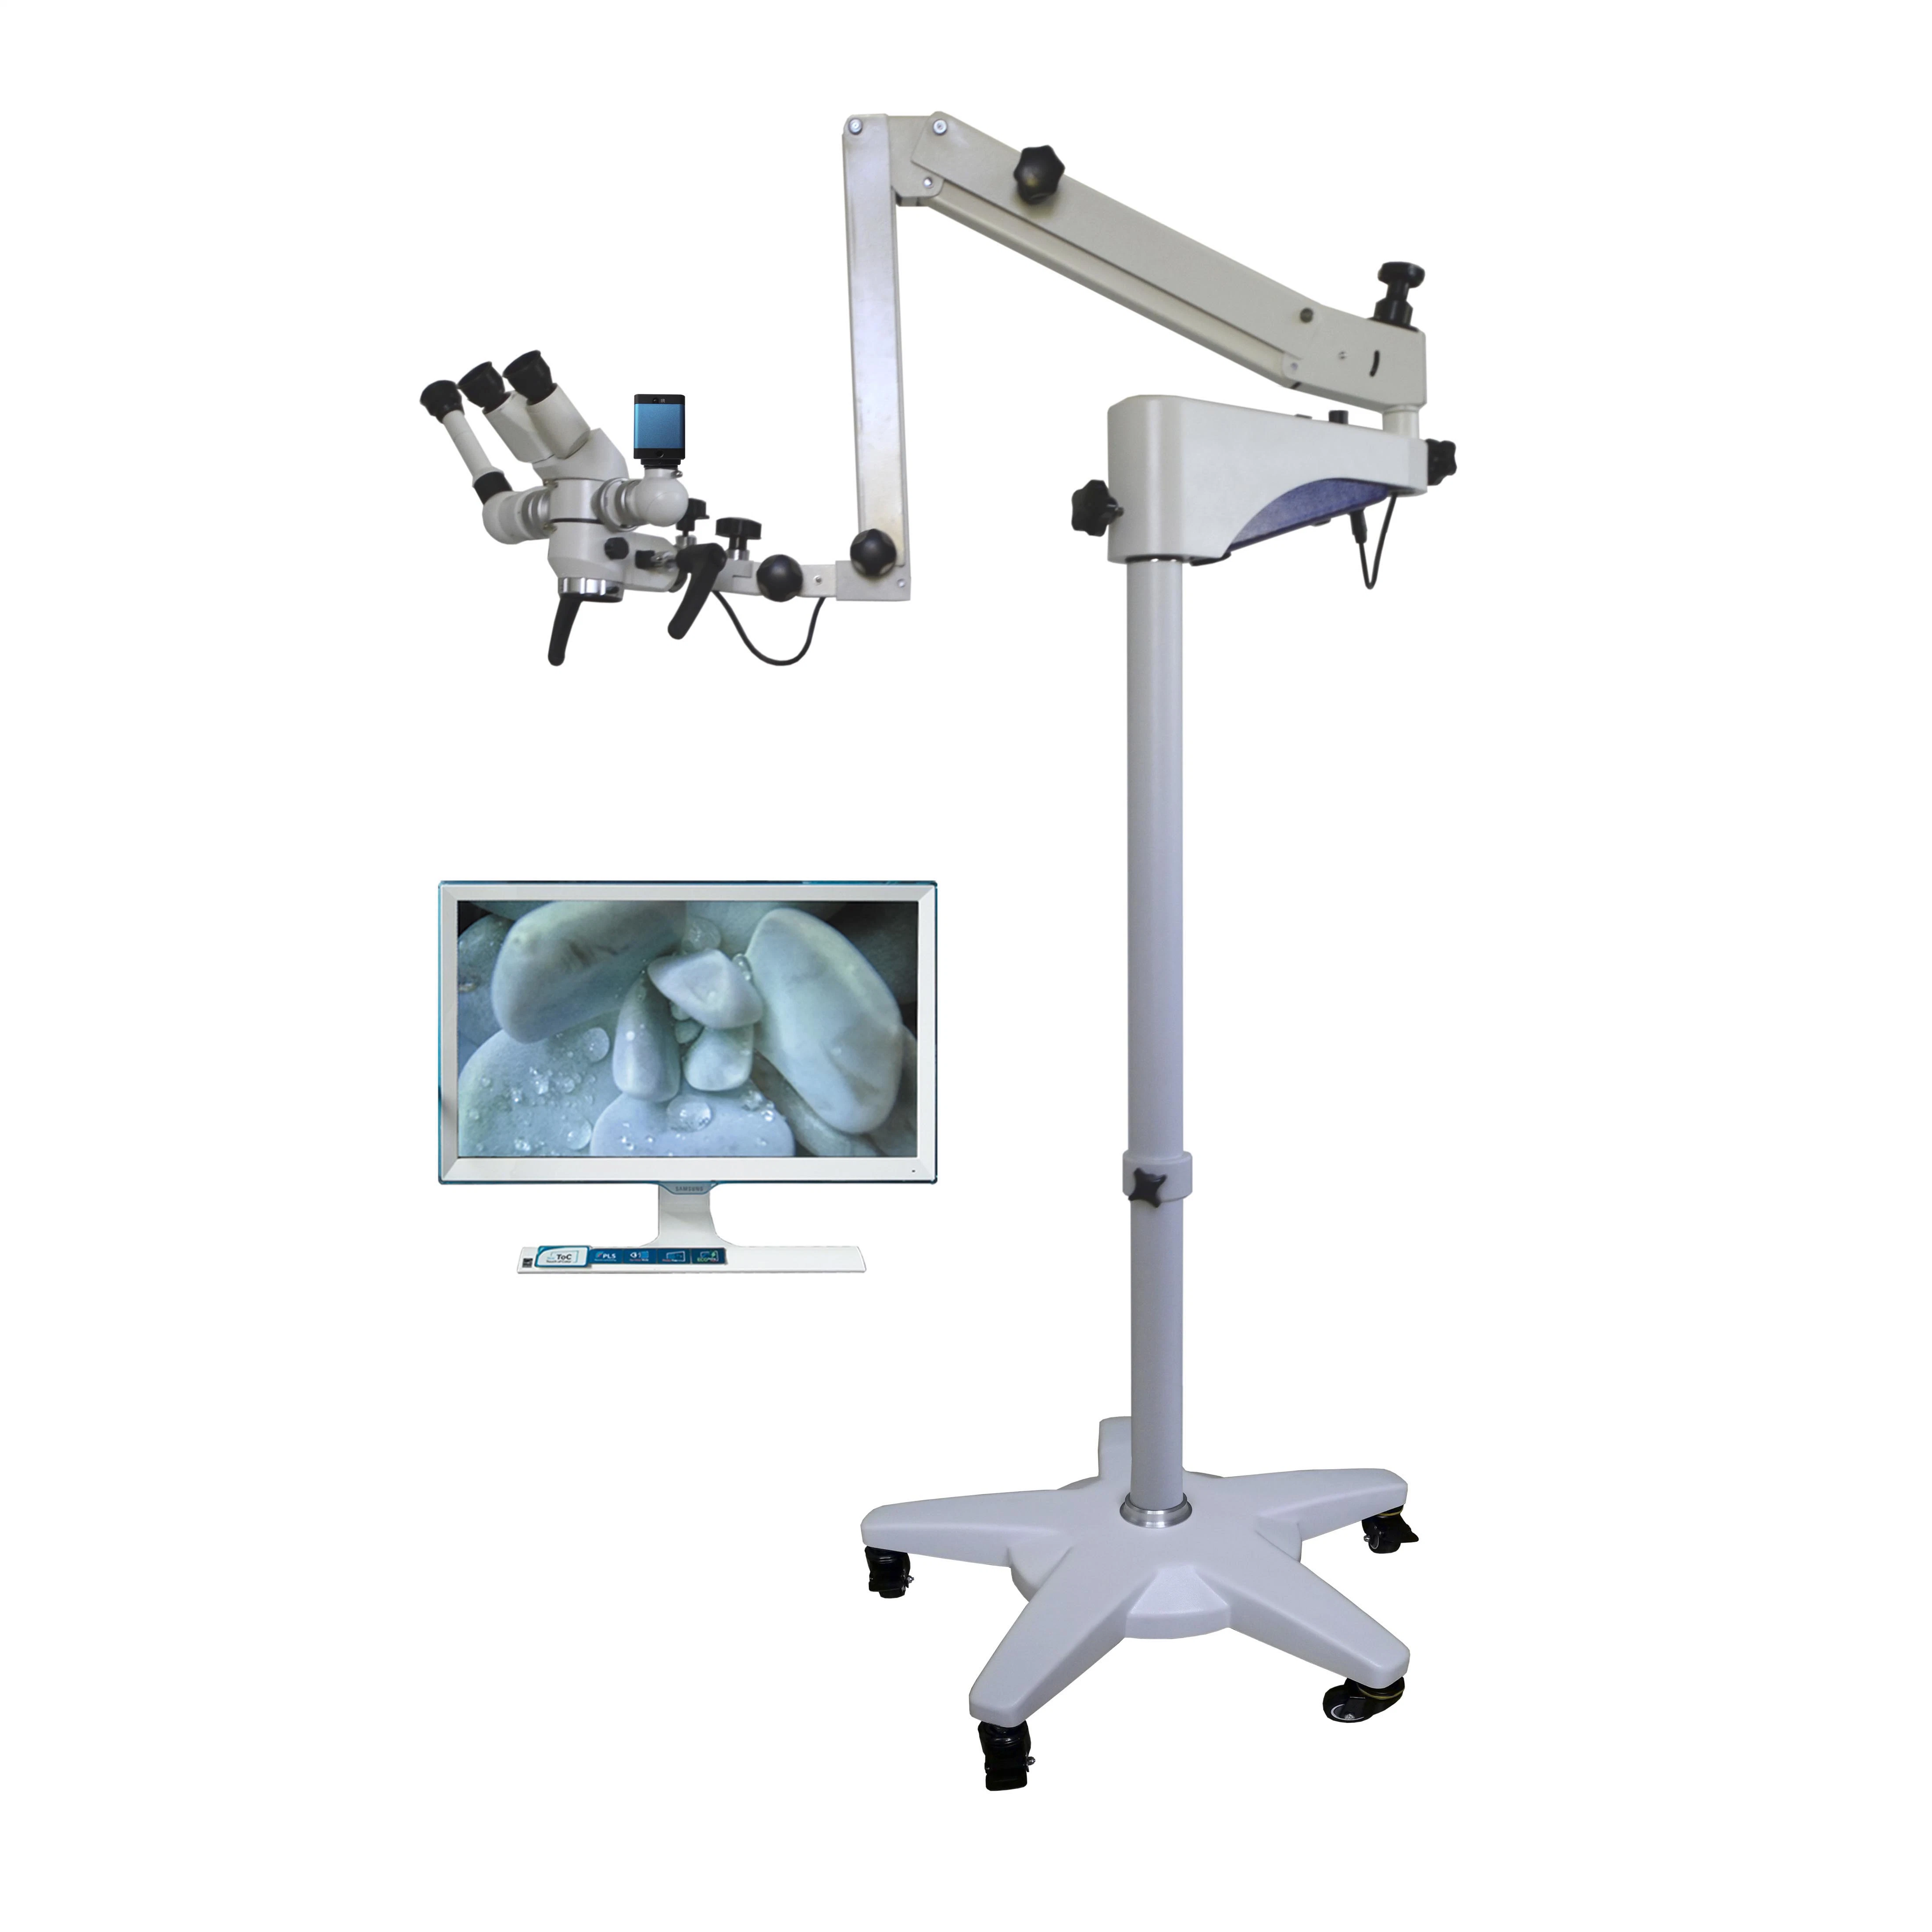 Cheaper Price Xty-120 Xty-130 Fixed Binocular Optical LED Surgical Ophthalmology Ent Dental Operation Microscope